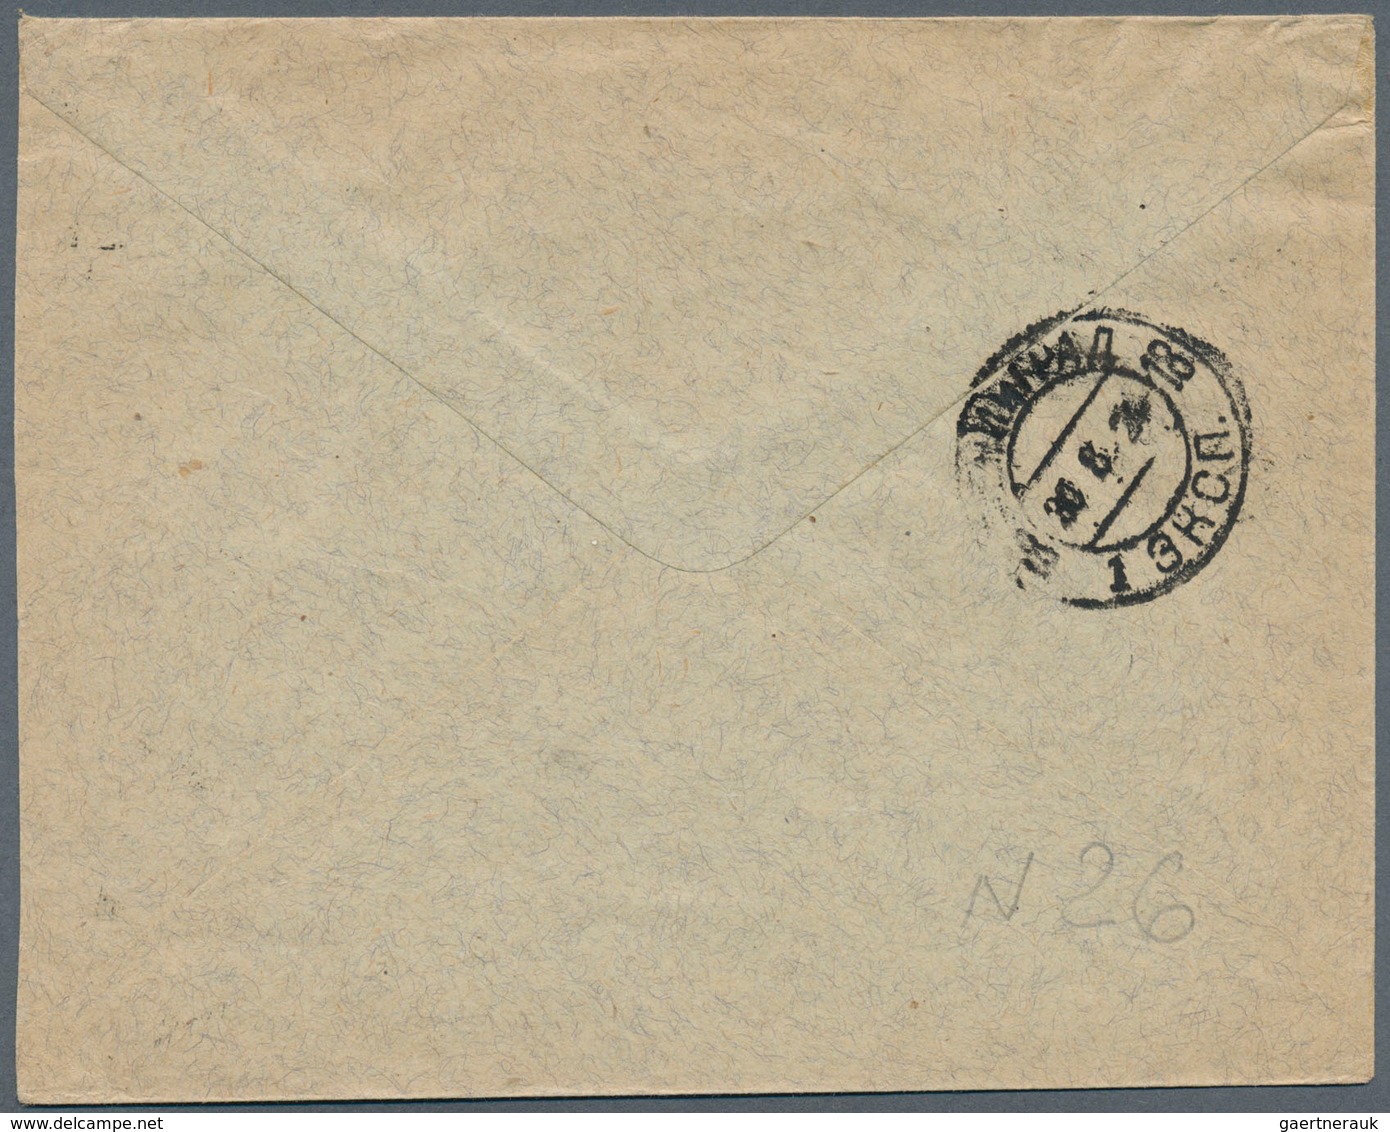 Sowjetunion: 1924, Air Mail Vignette With 20 K. Both Tied "LENINGRAD 3 8 24" To Cover To London, Ama - Briefe U. Dokumente